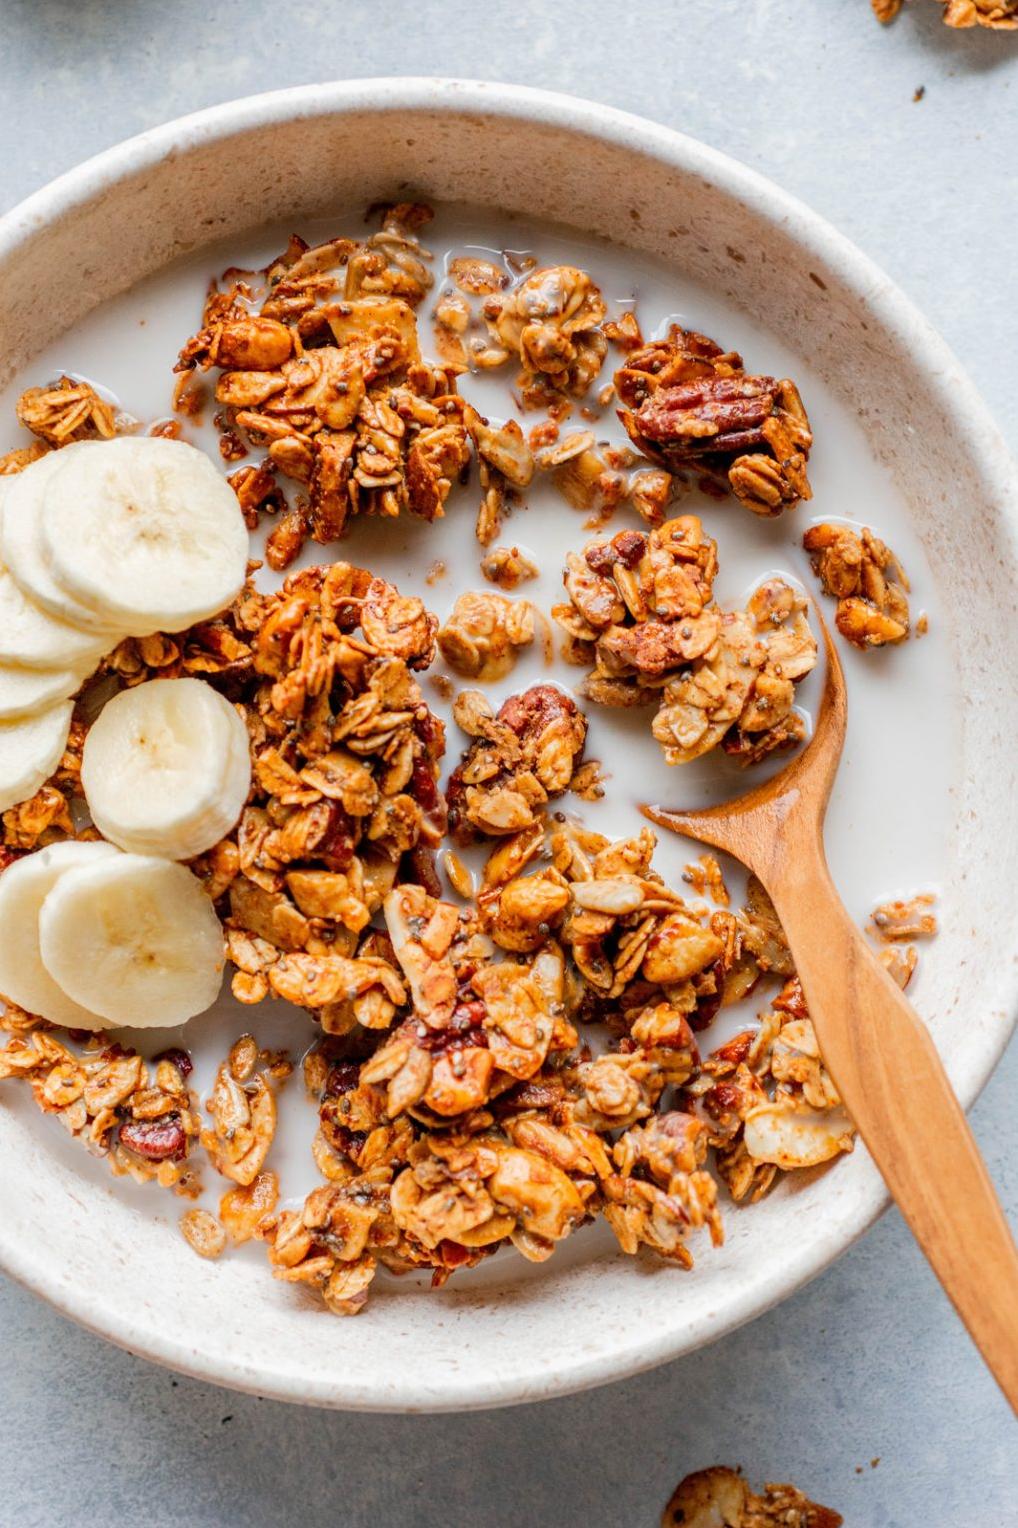  Serve this gluten-free granola with almond milk, soy milk, yogurt, or sprinkle it on top of your favorite smoothie bowl for extra crunch.